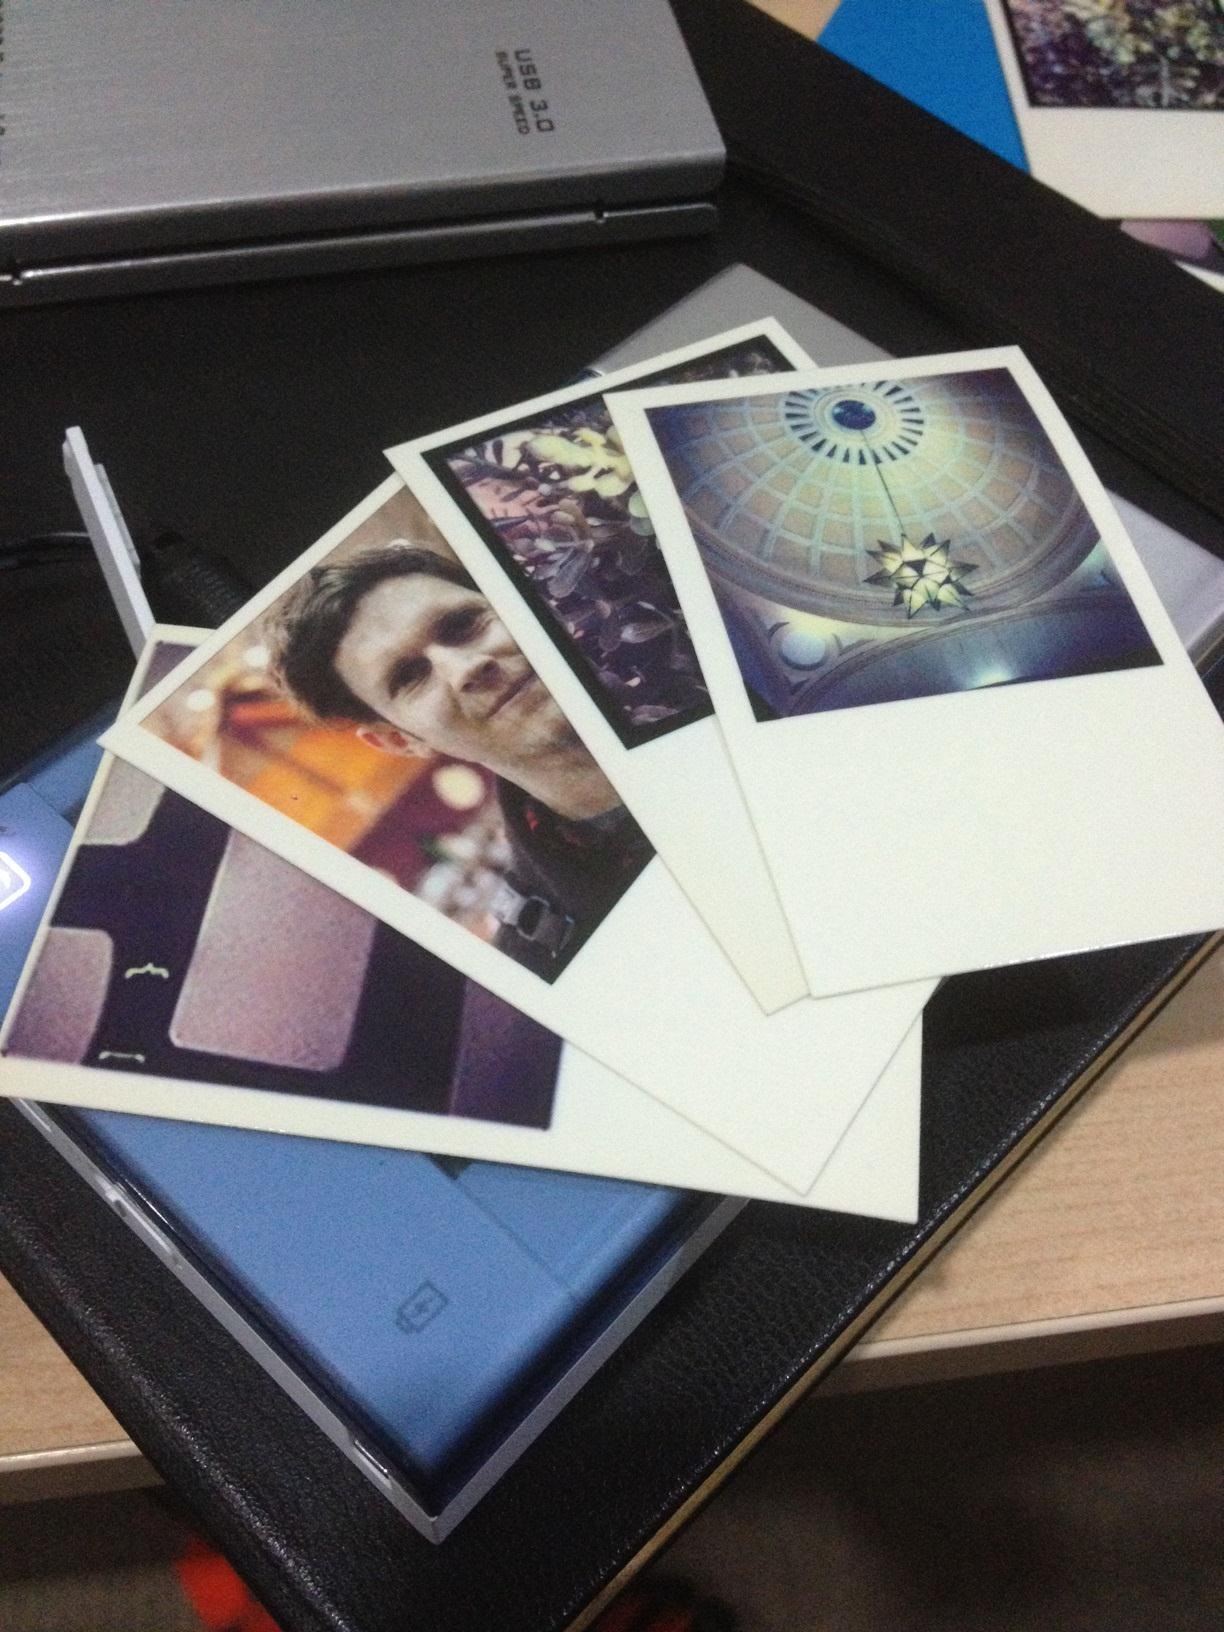 Hack Your Old Printer to Automatically Print Hashtag-Based Instagram Photos